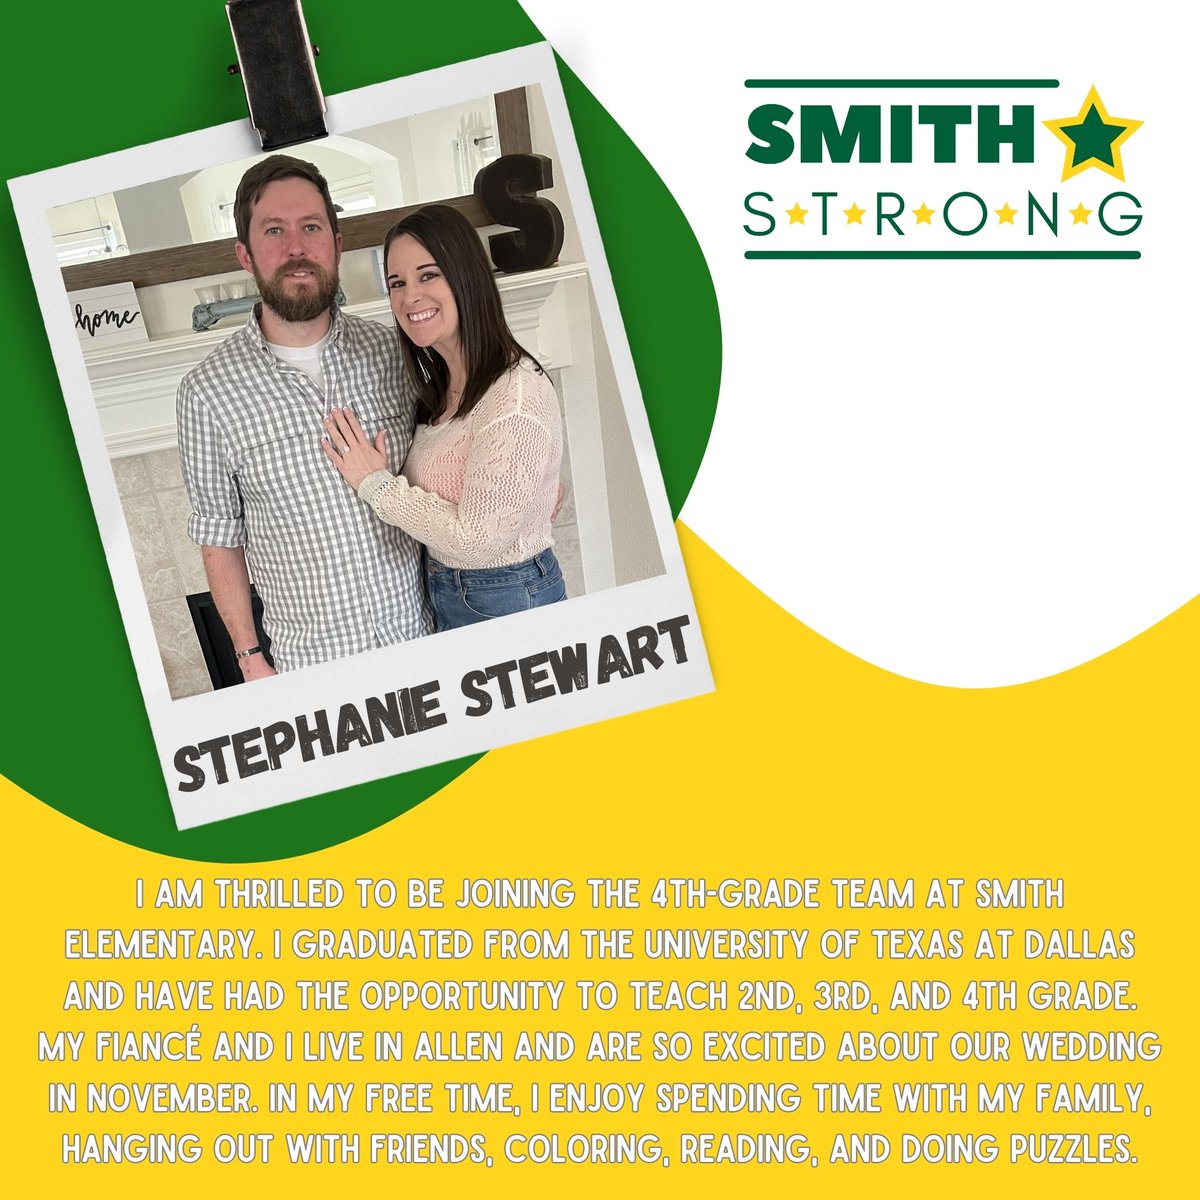 #SMITHSTRONG💪, help us welcome Stephanie Stewart to Smith Elementary! She will be joining our 4th-grade team here at Smith Elementary!💪💚⭐️